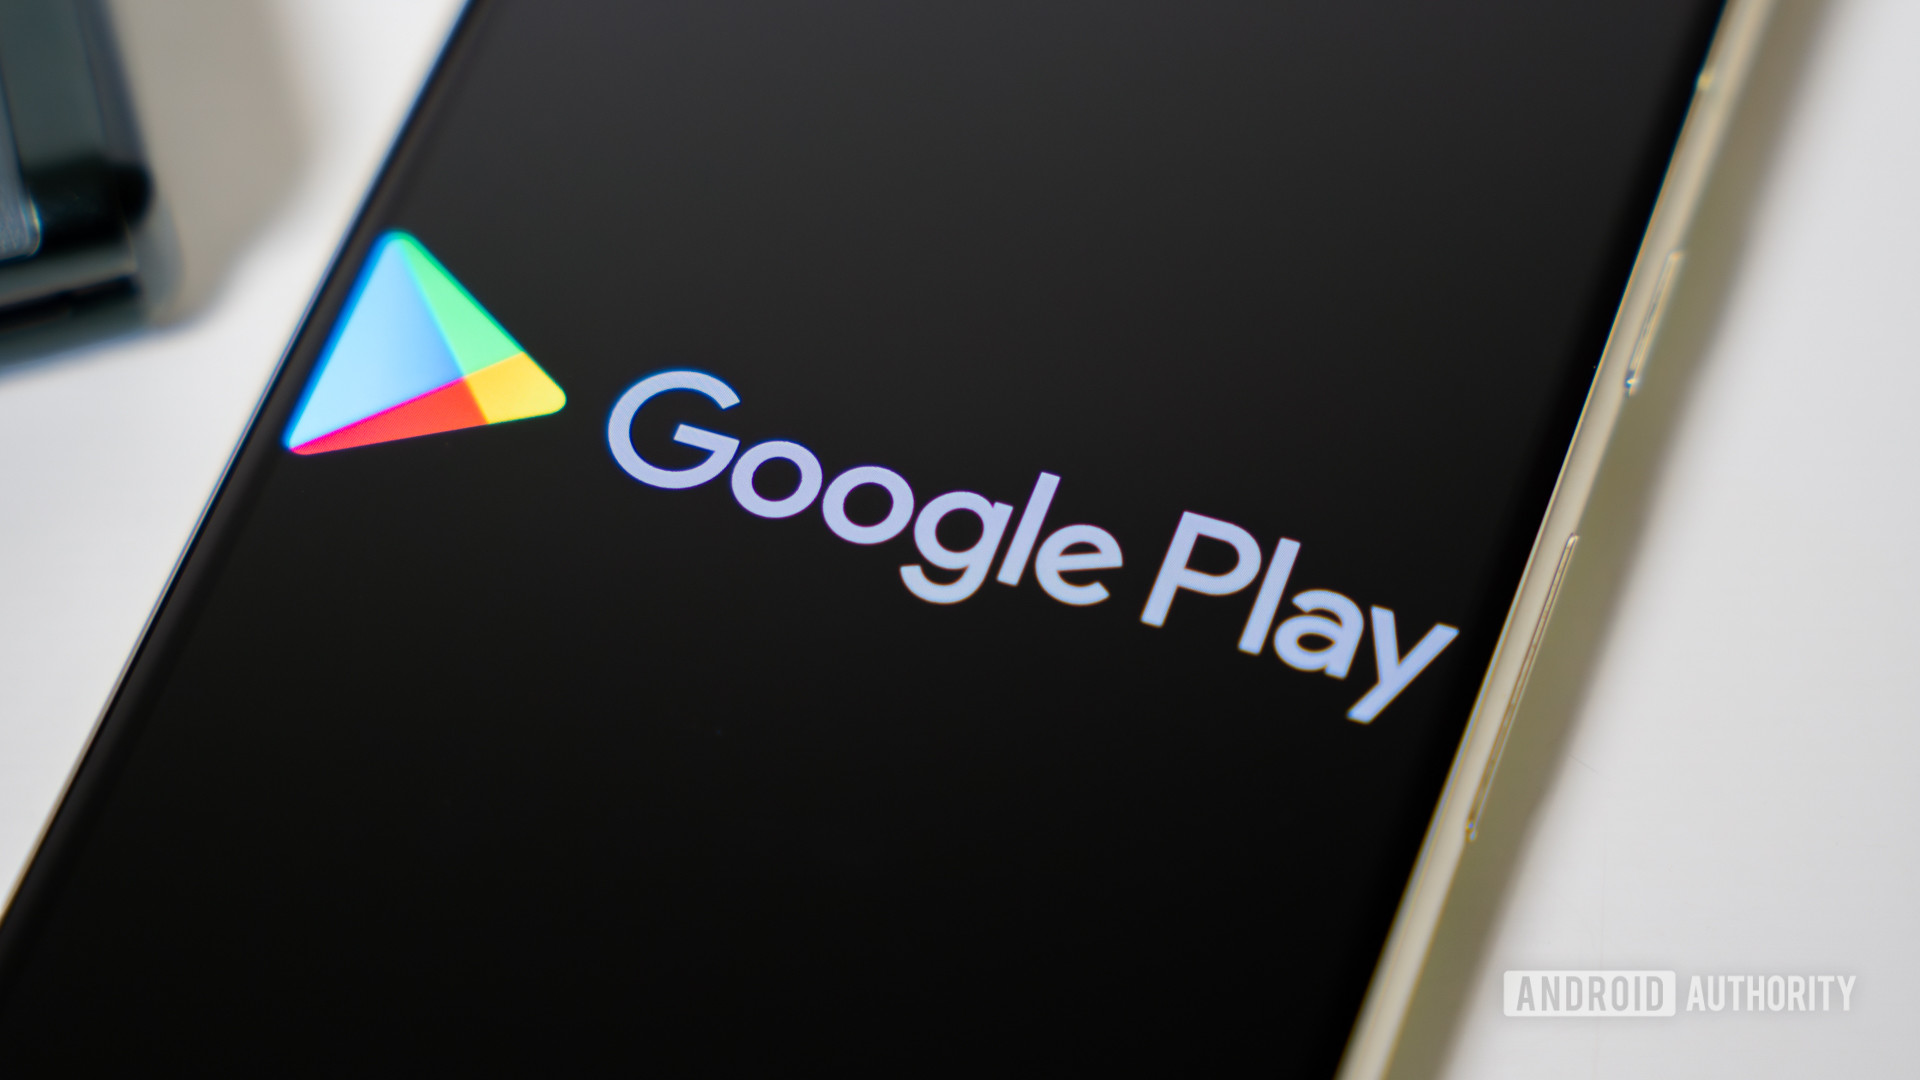 Finally, the Play Store can download two apps at once